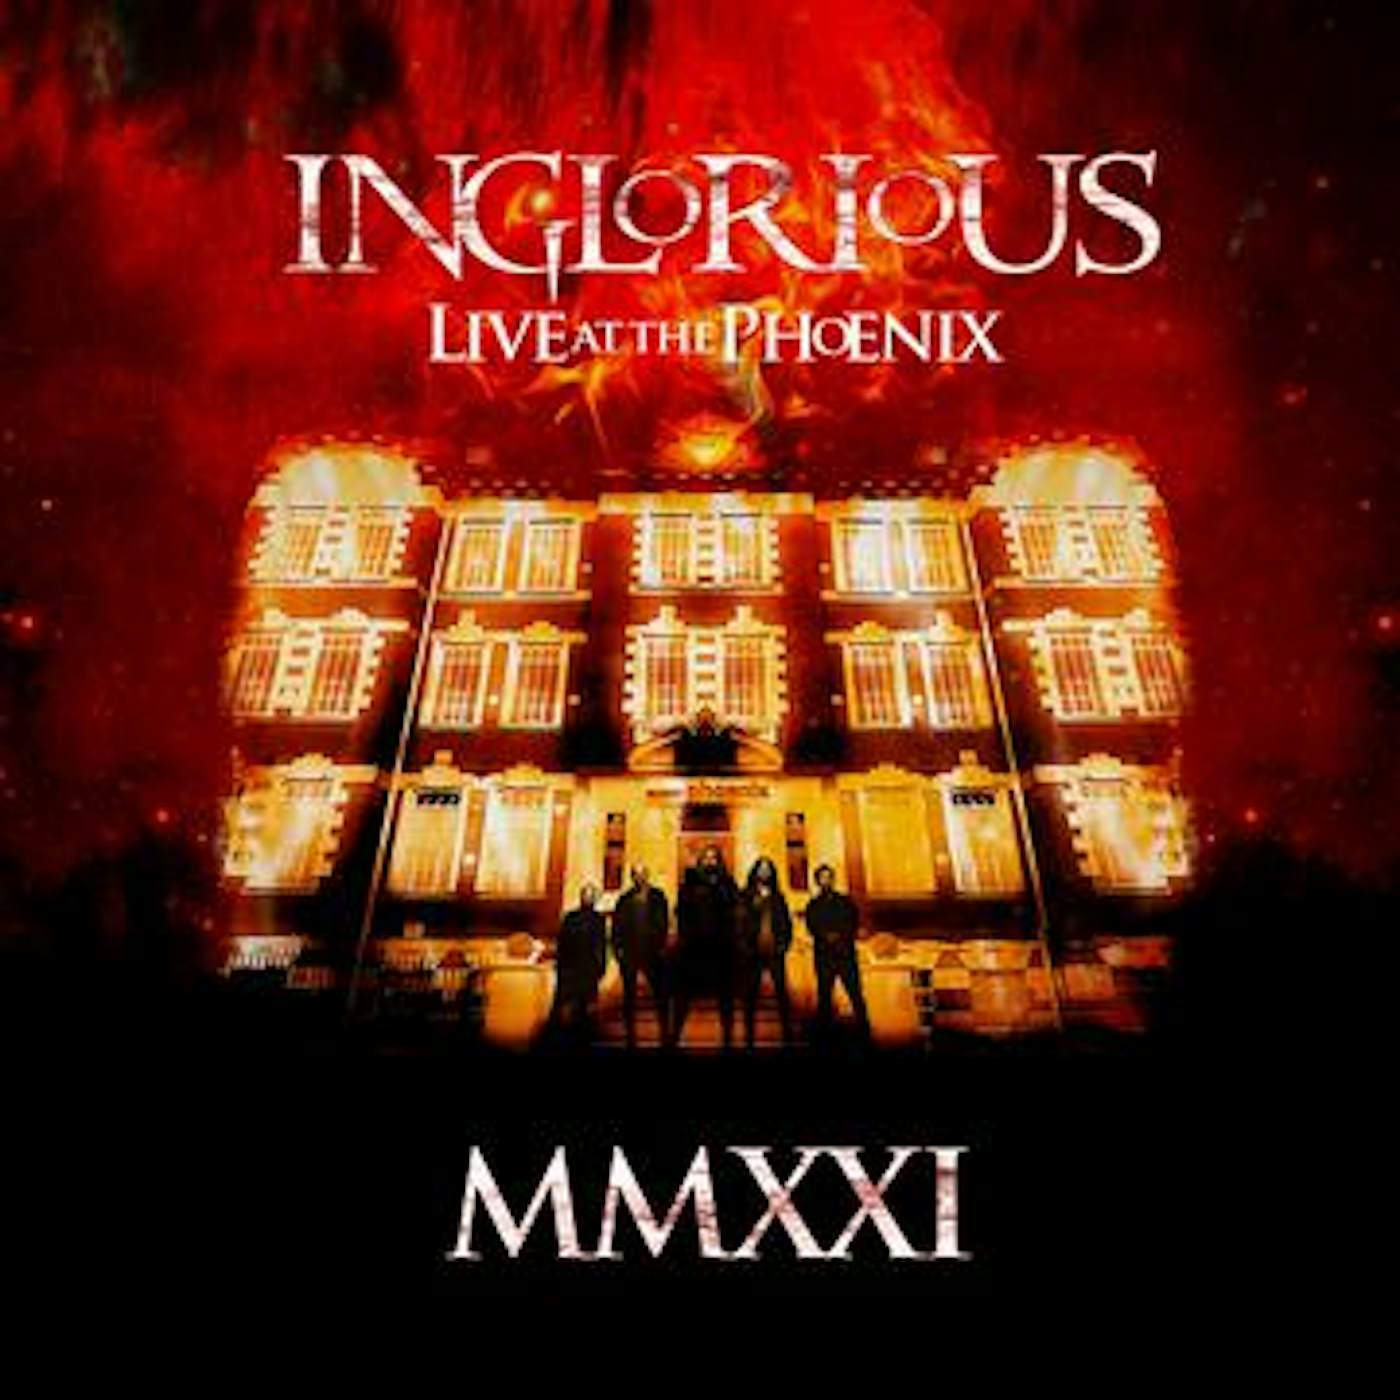 Inglorious Mmxxi Live At The Phoenix CD